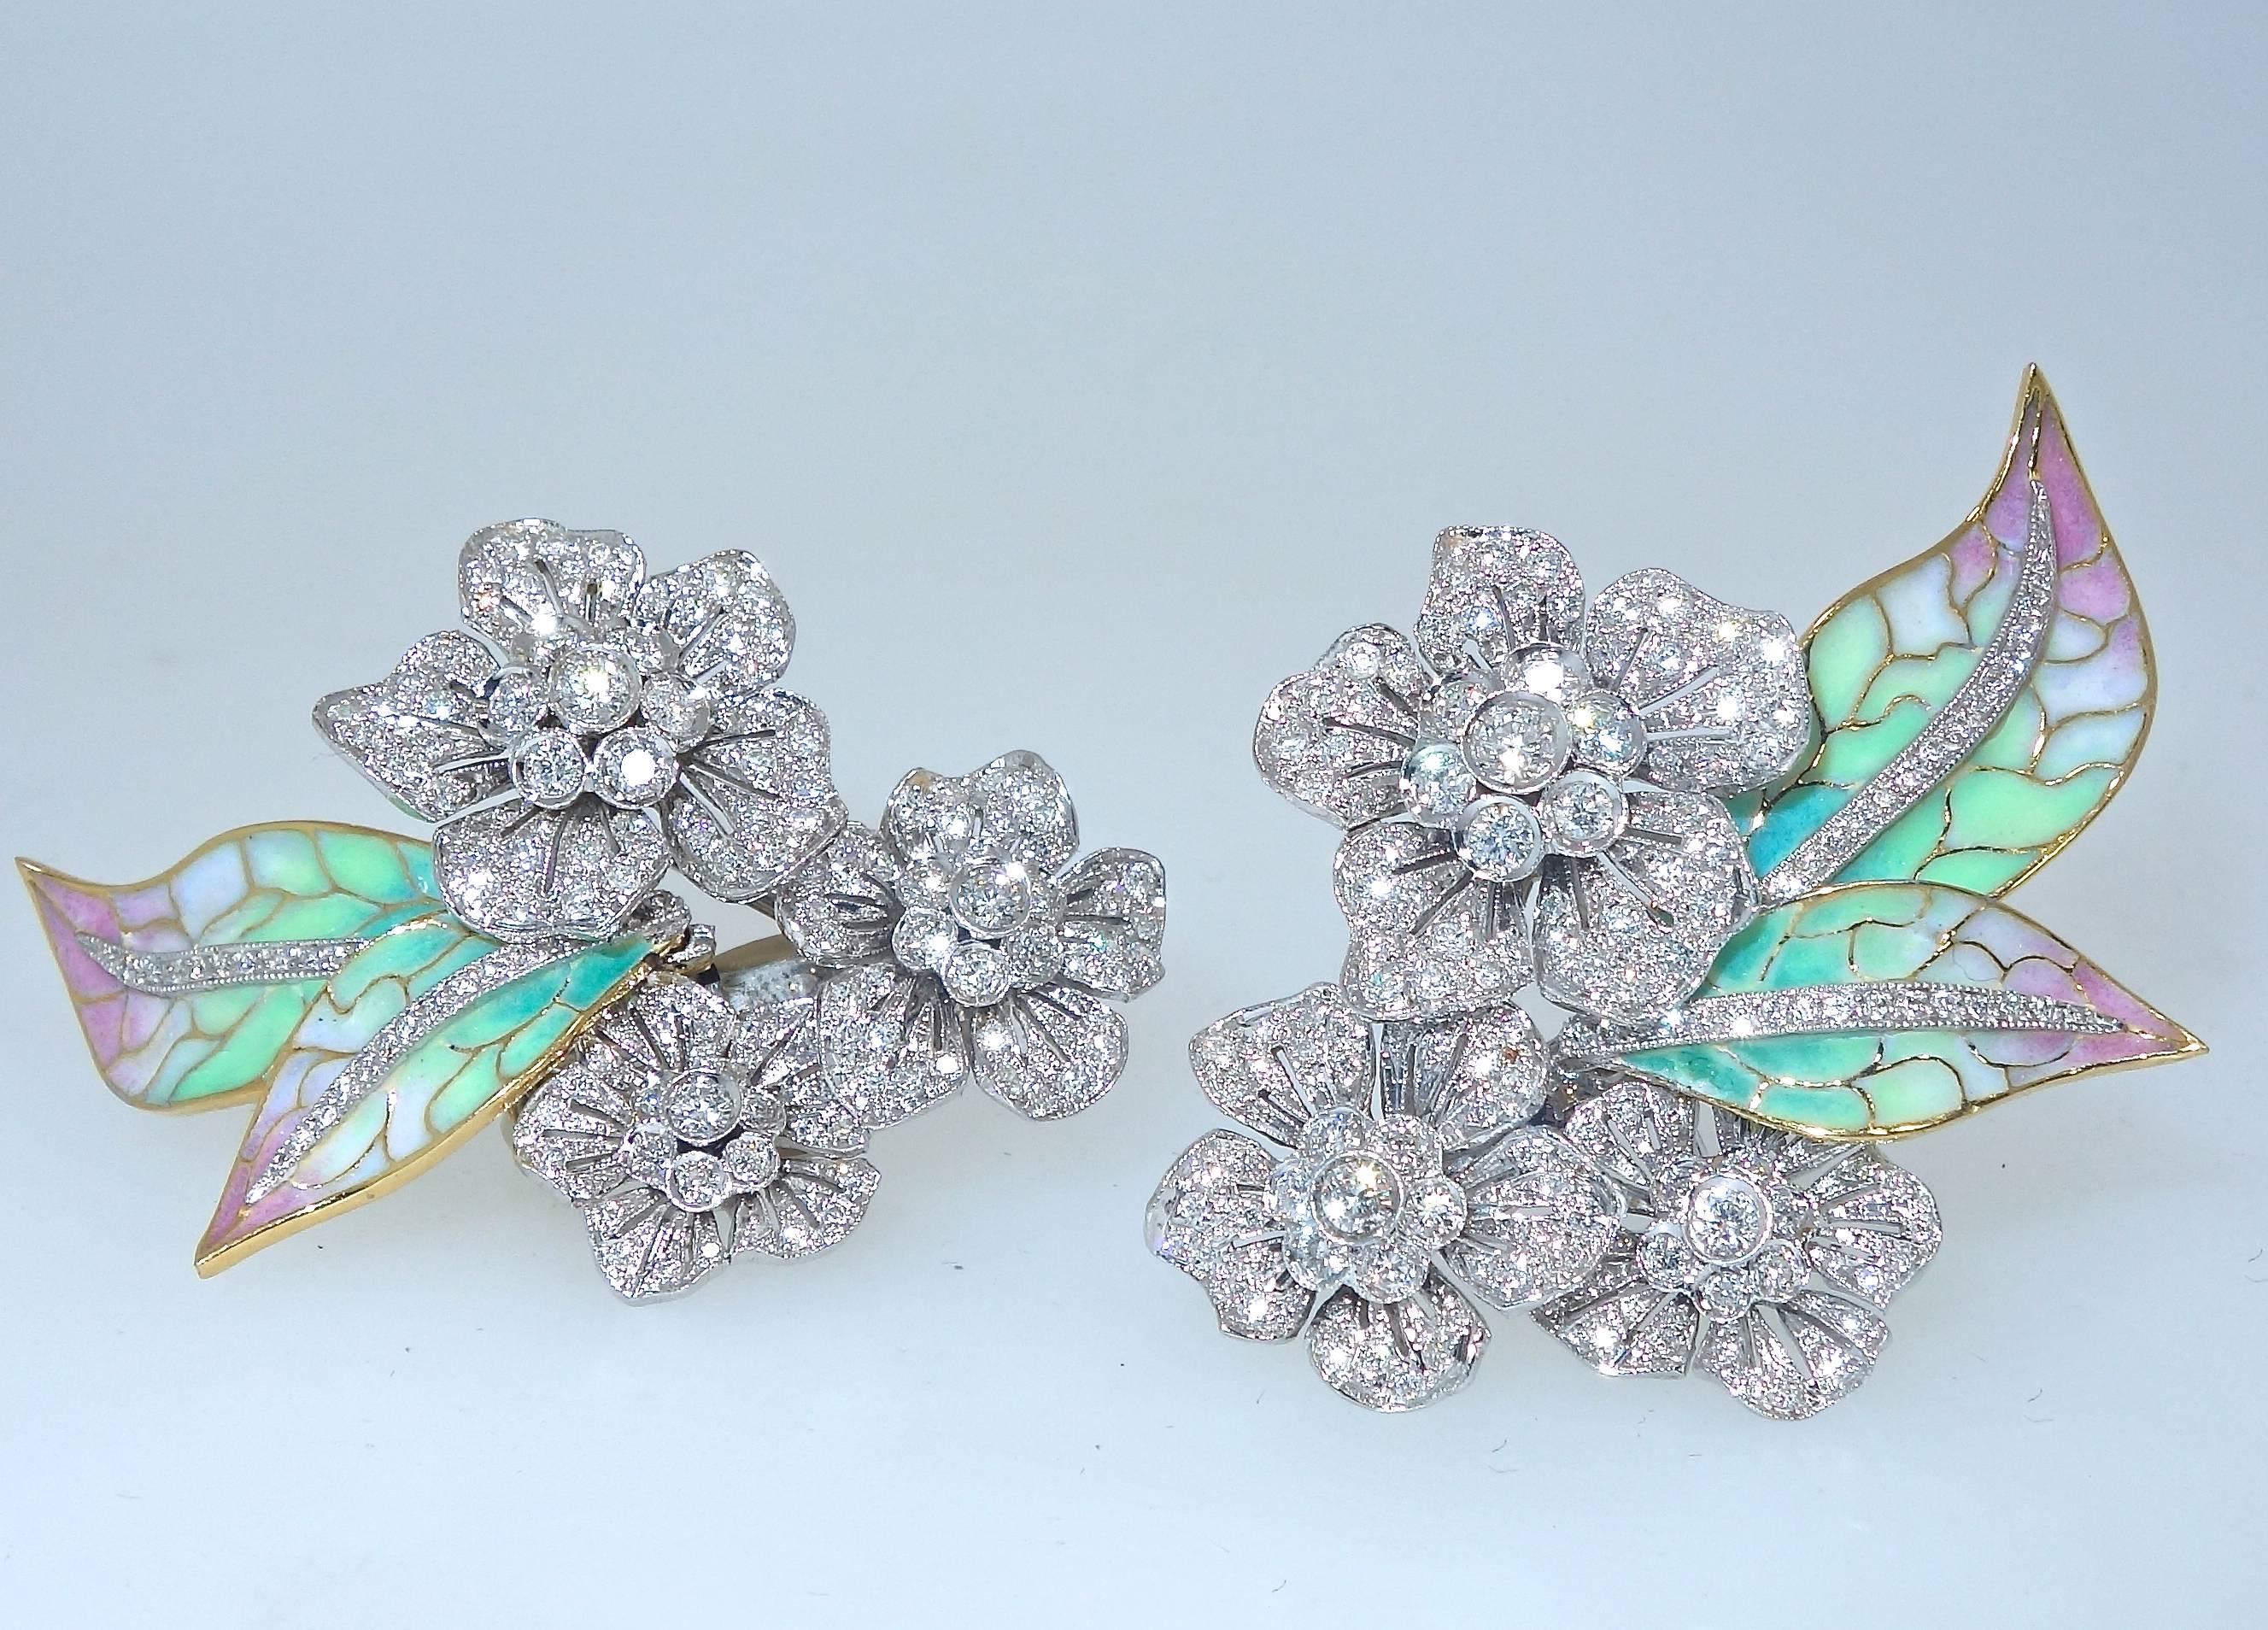 Plique a jour enamel leaves accent the diamond flowers creating a lovely earring.  The diamonds weigh approximately 4 cts.   They are well set with fine white color - near colorless (H) and very slightly included VS.  The shaded pink, green and